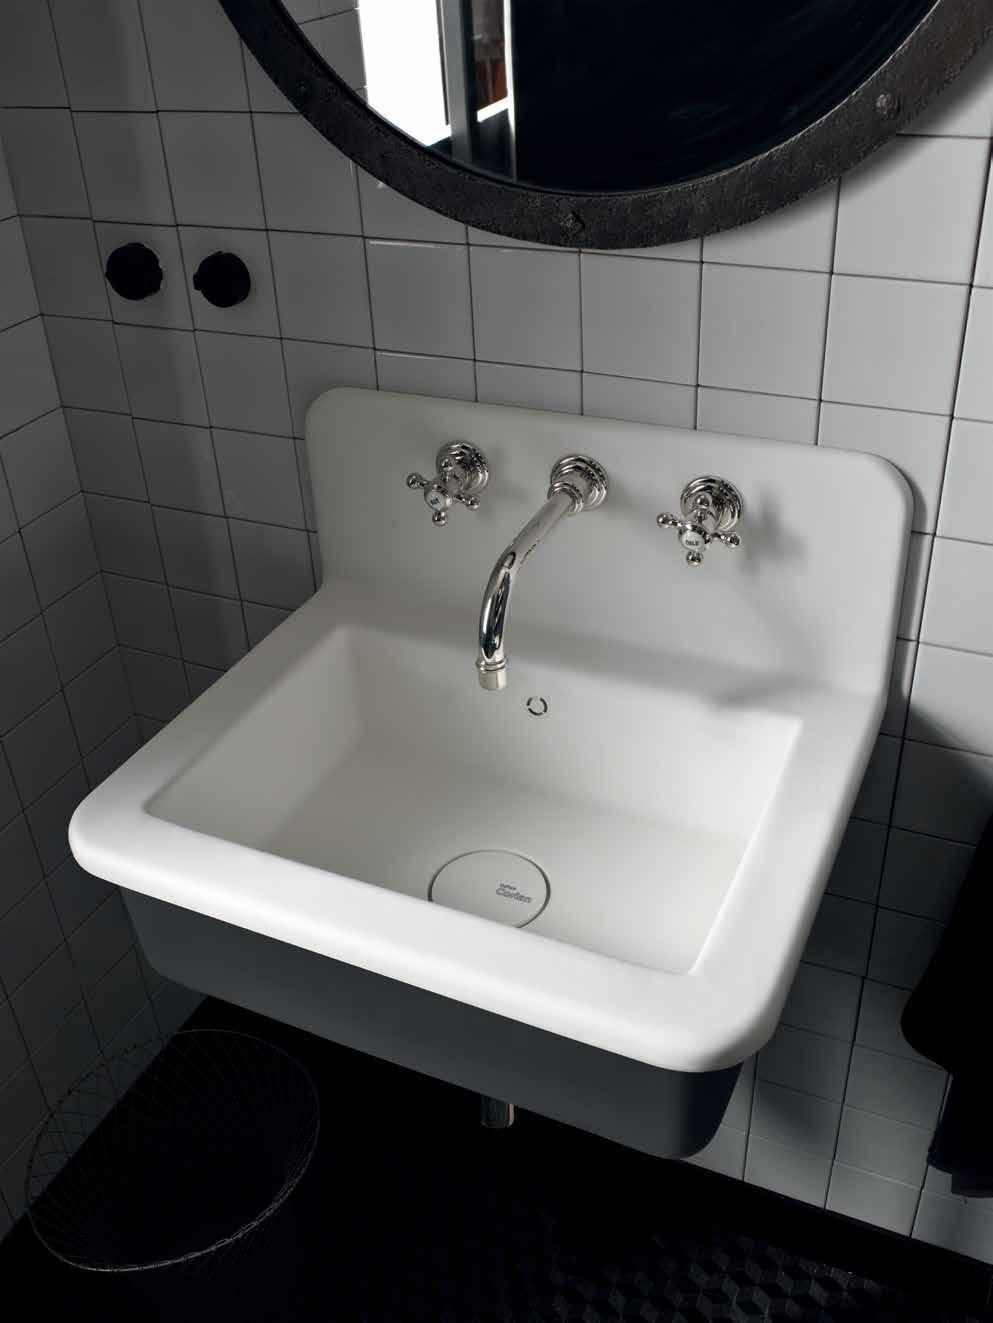 The beauty of DuPont Corian lies in its adaptability.